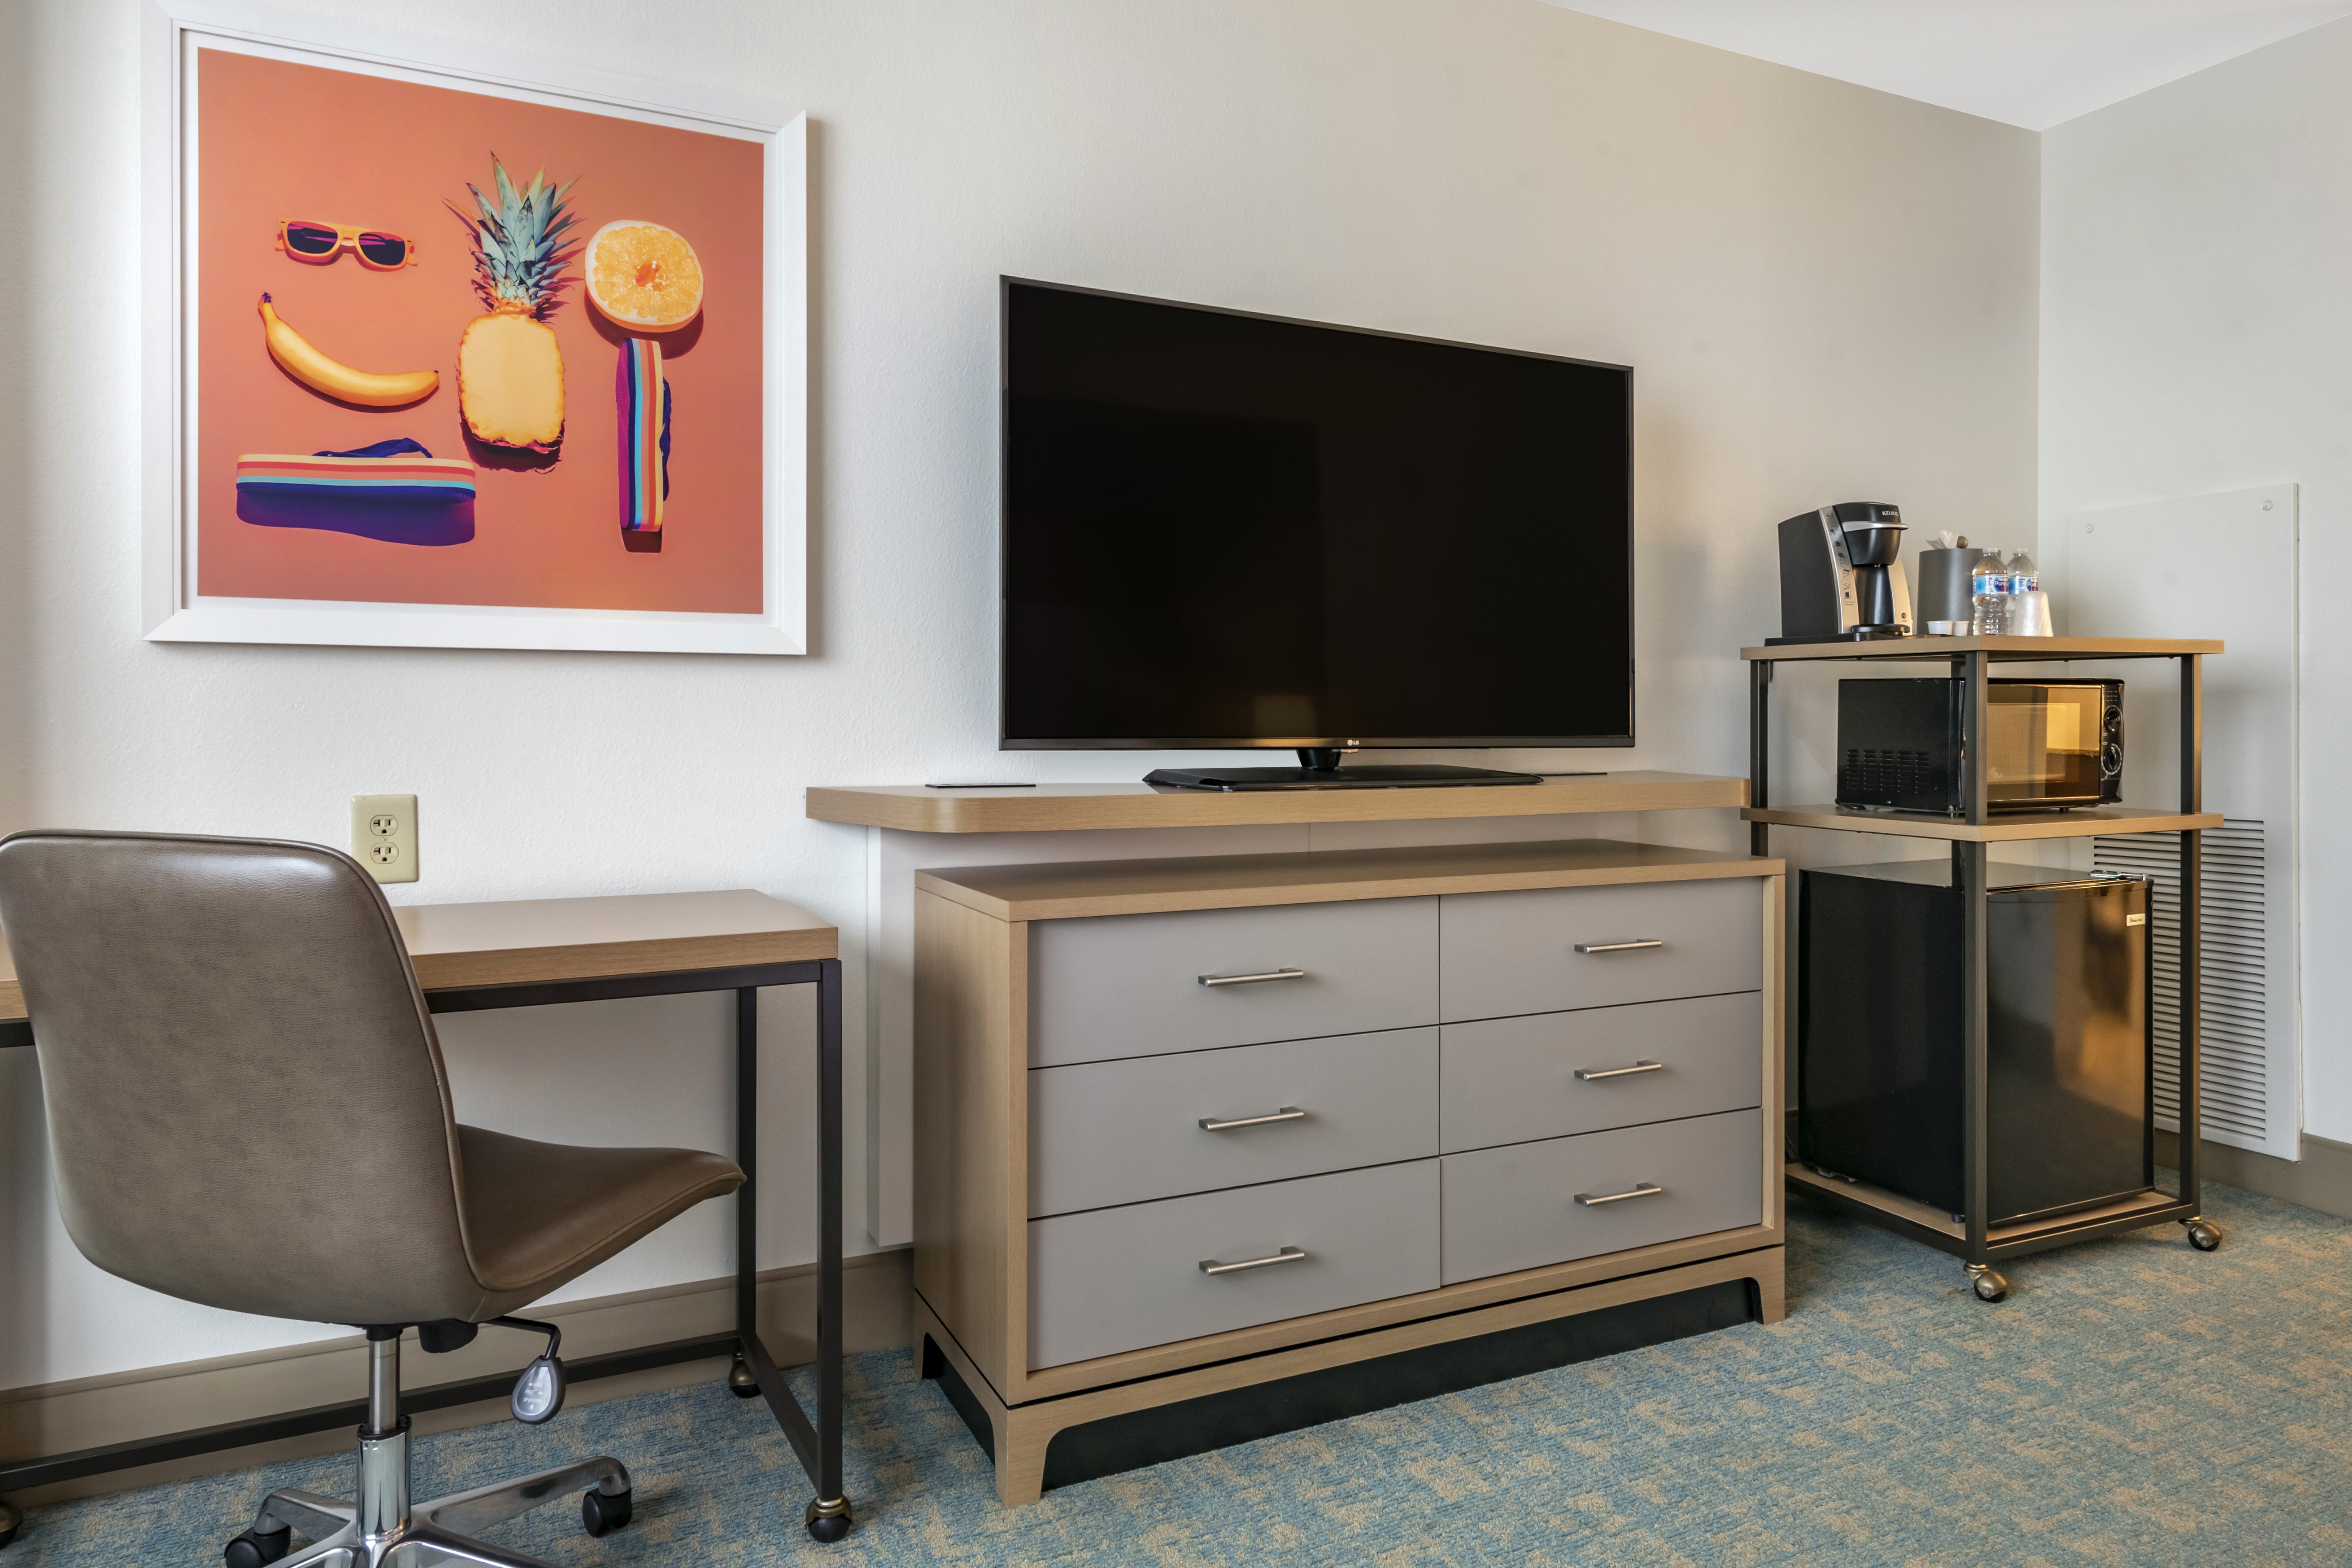 All guest rooms feature microwaves, mini-fridges and free wi-fi